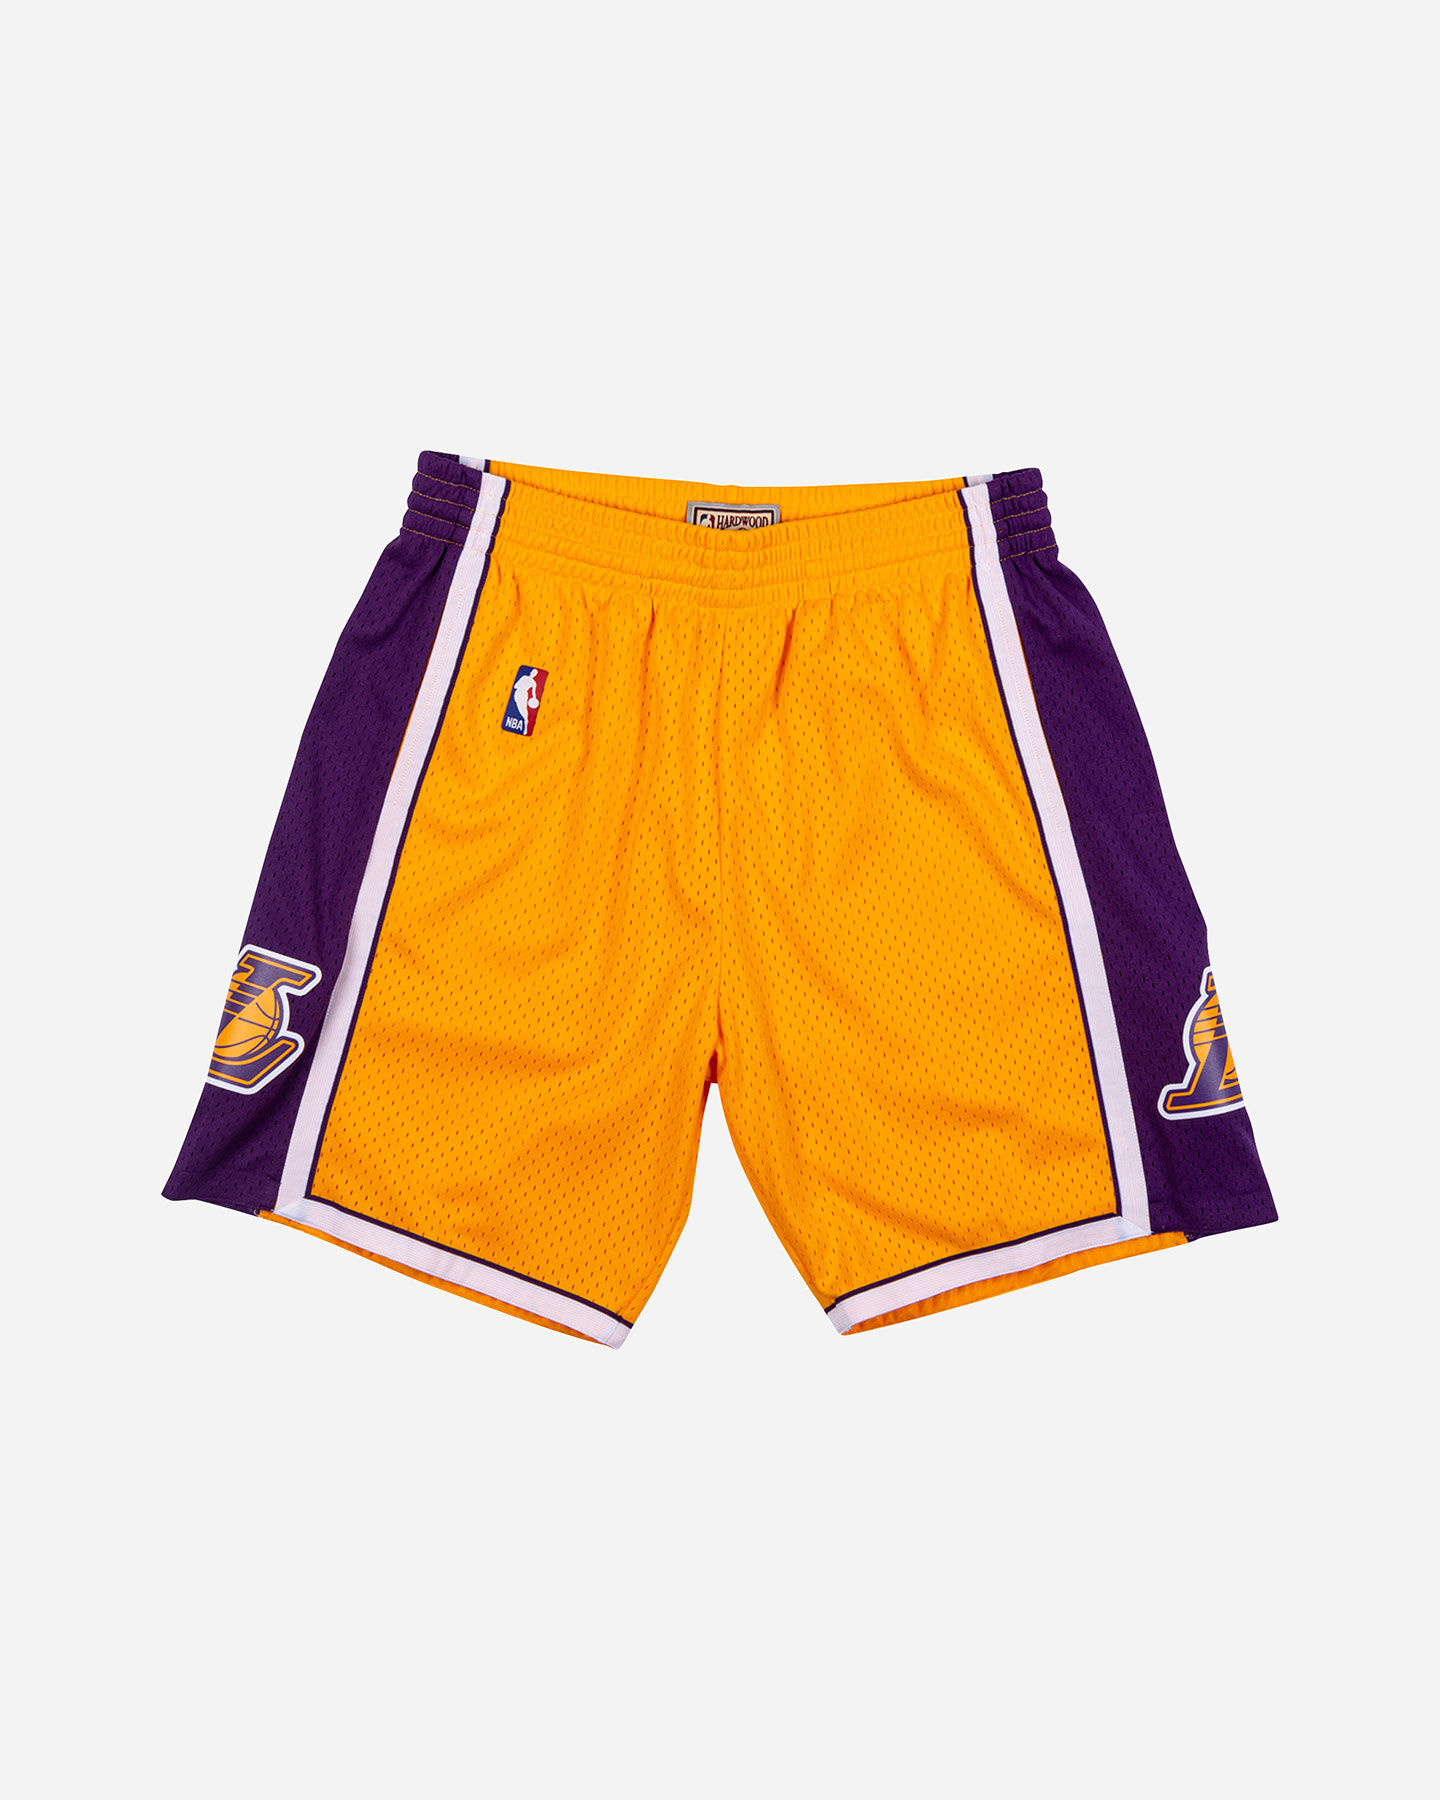  Pantaloncini basket MITCHELL&NESS NBA LOS ANGELES LAKERS '09 ICON M S4099981|001|S scatto 0